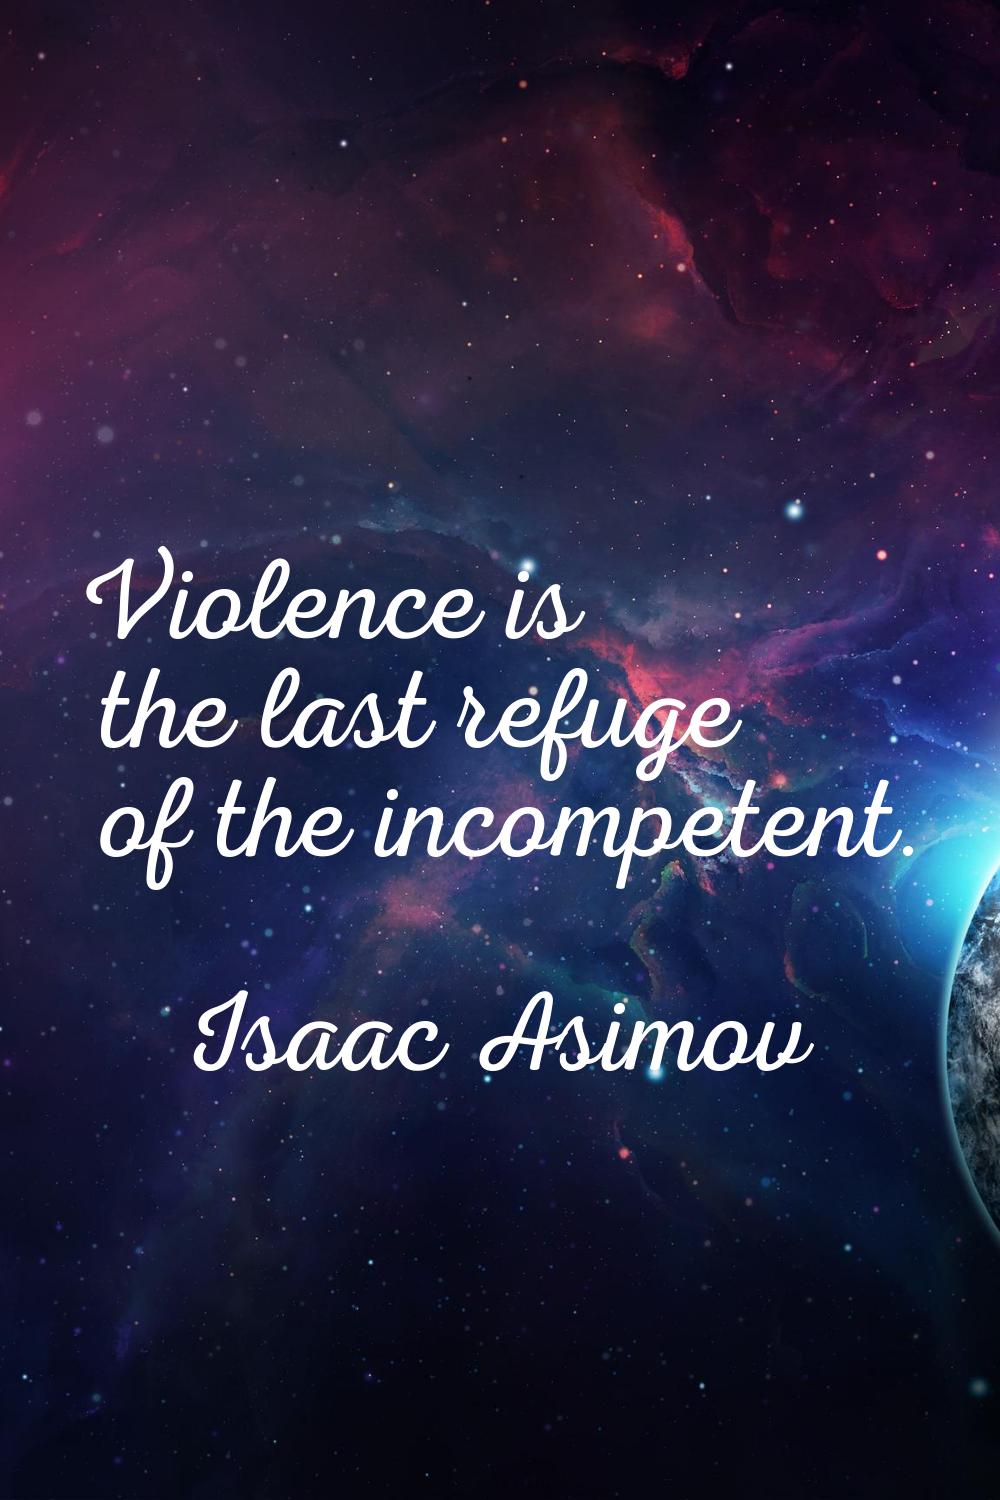 Violence is the last refuge of the incompetent.